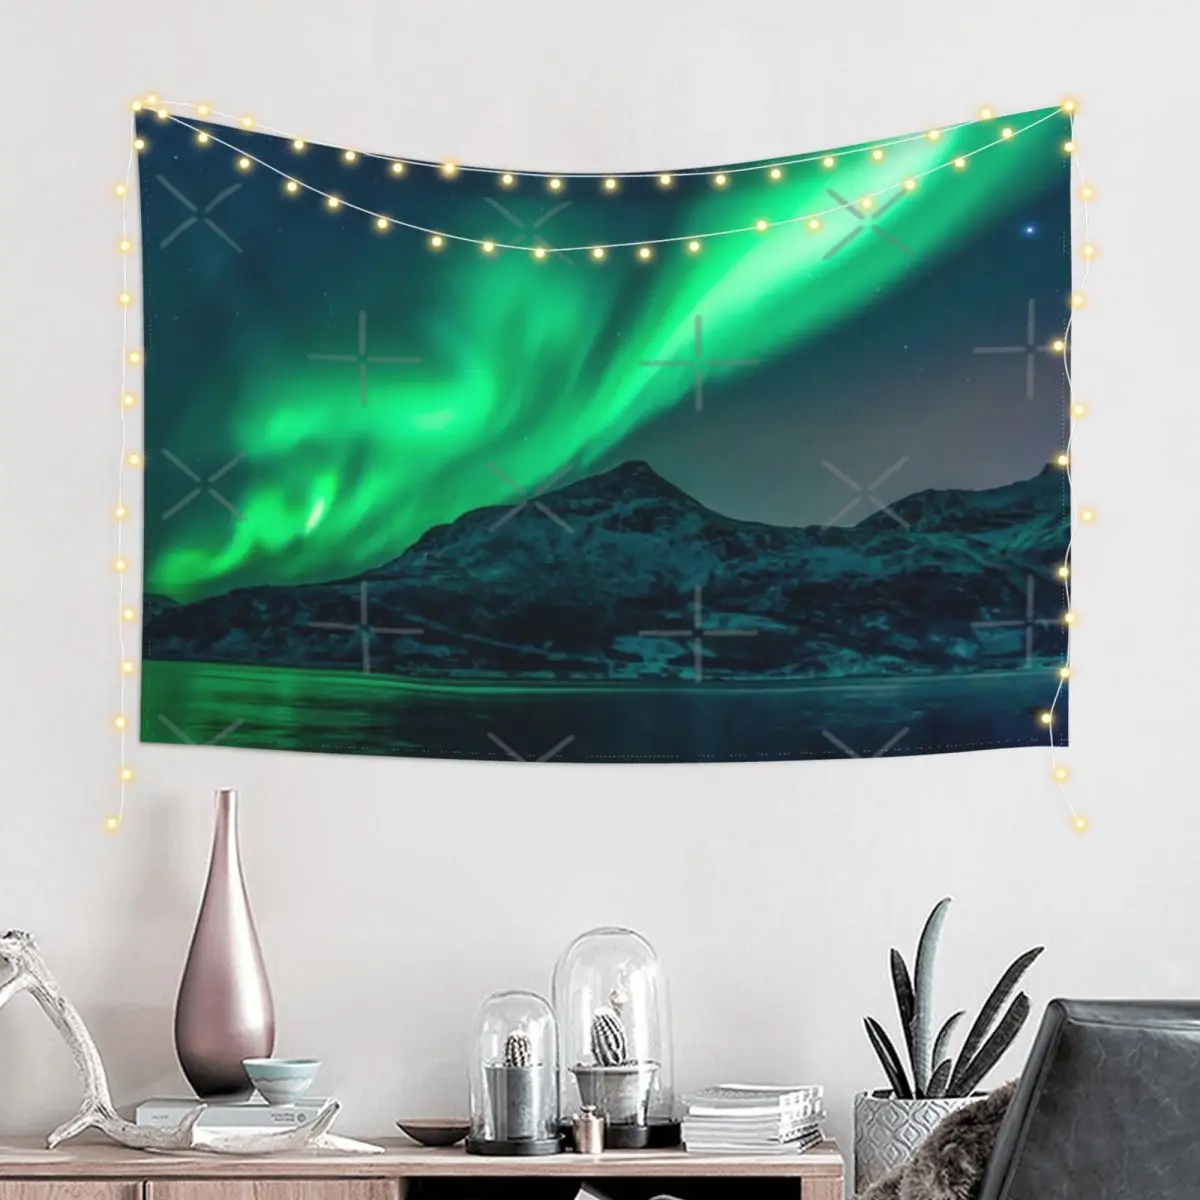 

Aurora Borealis (Northern Lights) Wall Decor Tapestry Holiday Etc. Birthday Gift Polyester Birthday Gift Delicate Multi Style